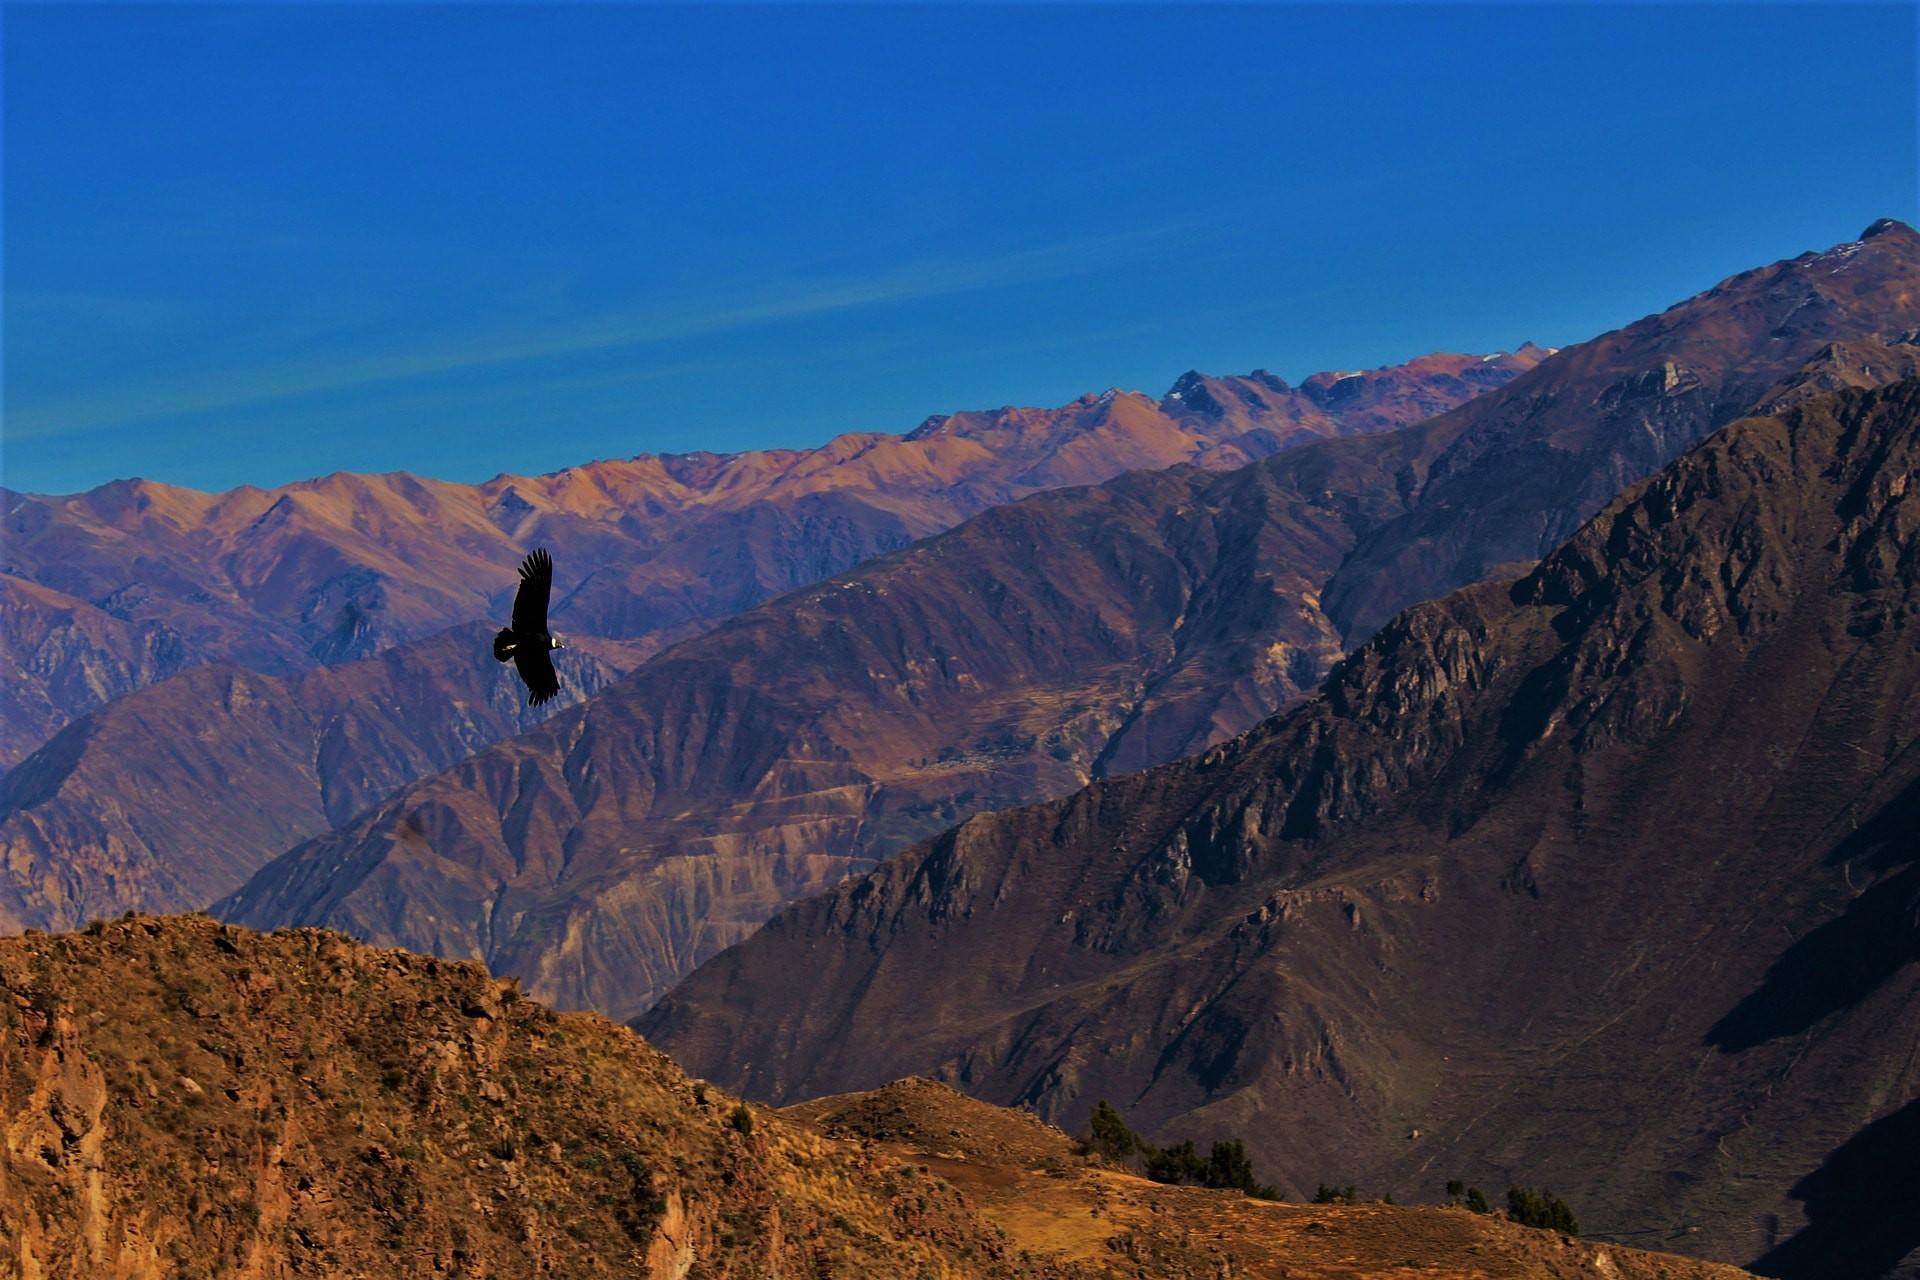 The Ultimate Trekking Guide to the Colca Canyon, Peru